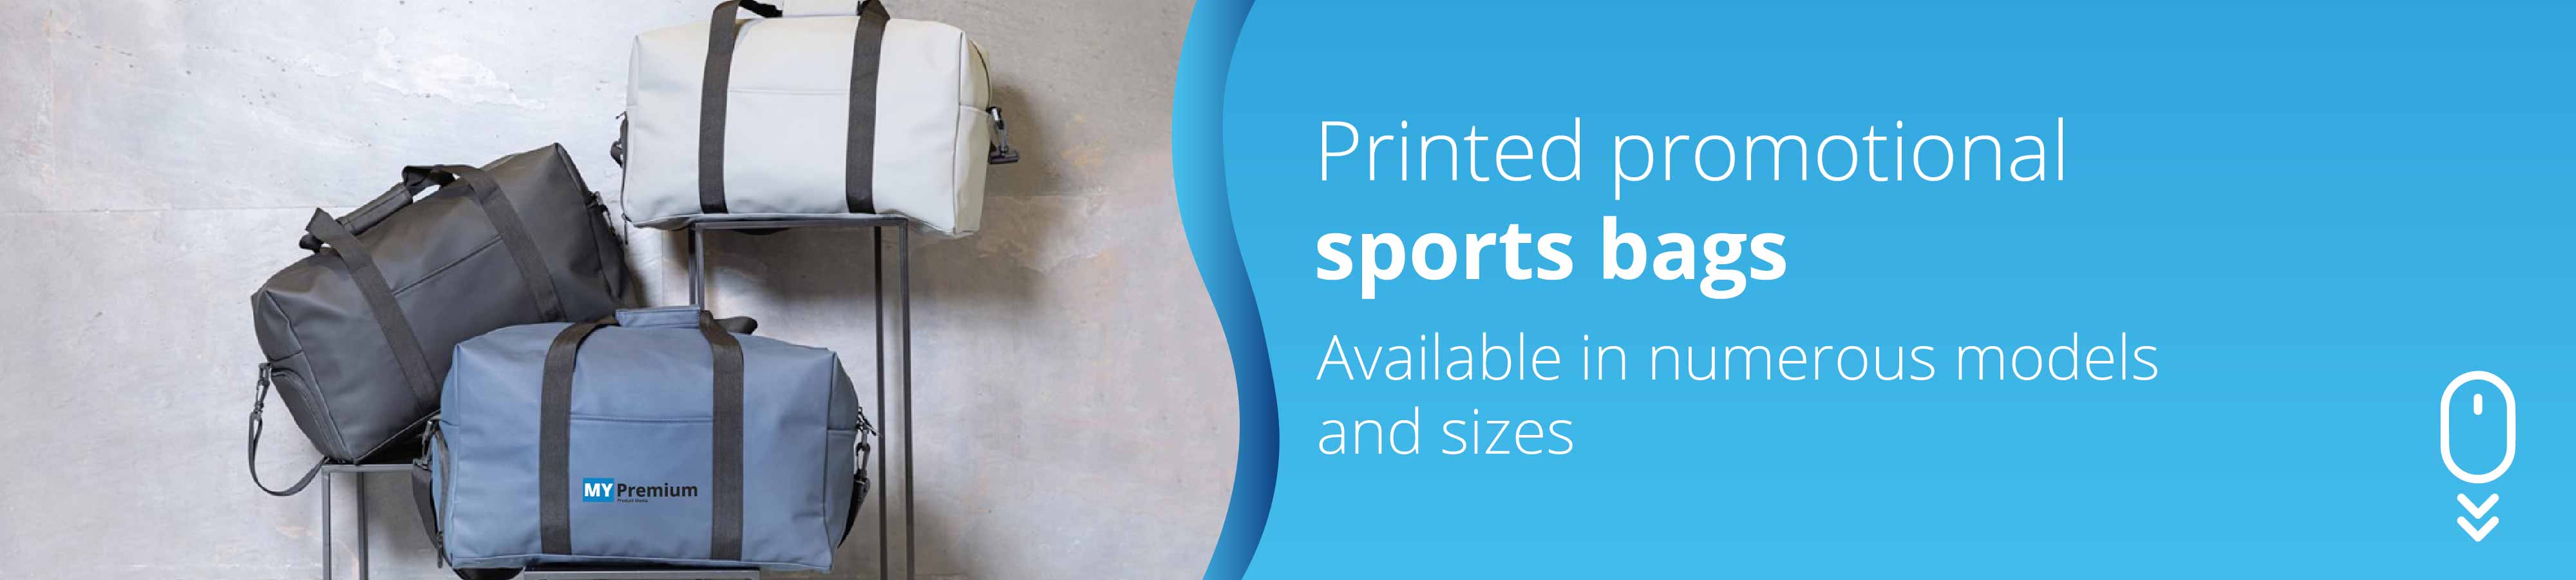 printed-promotional-sports-bags